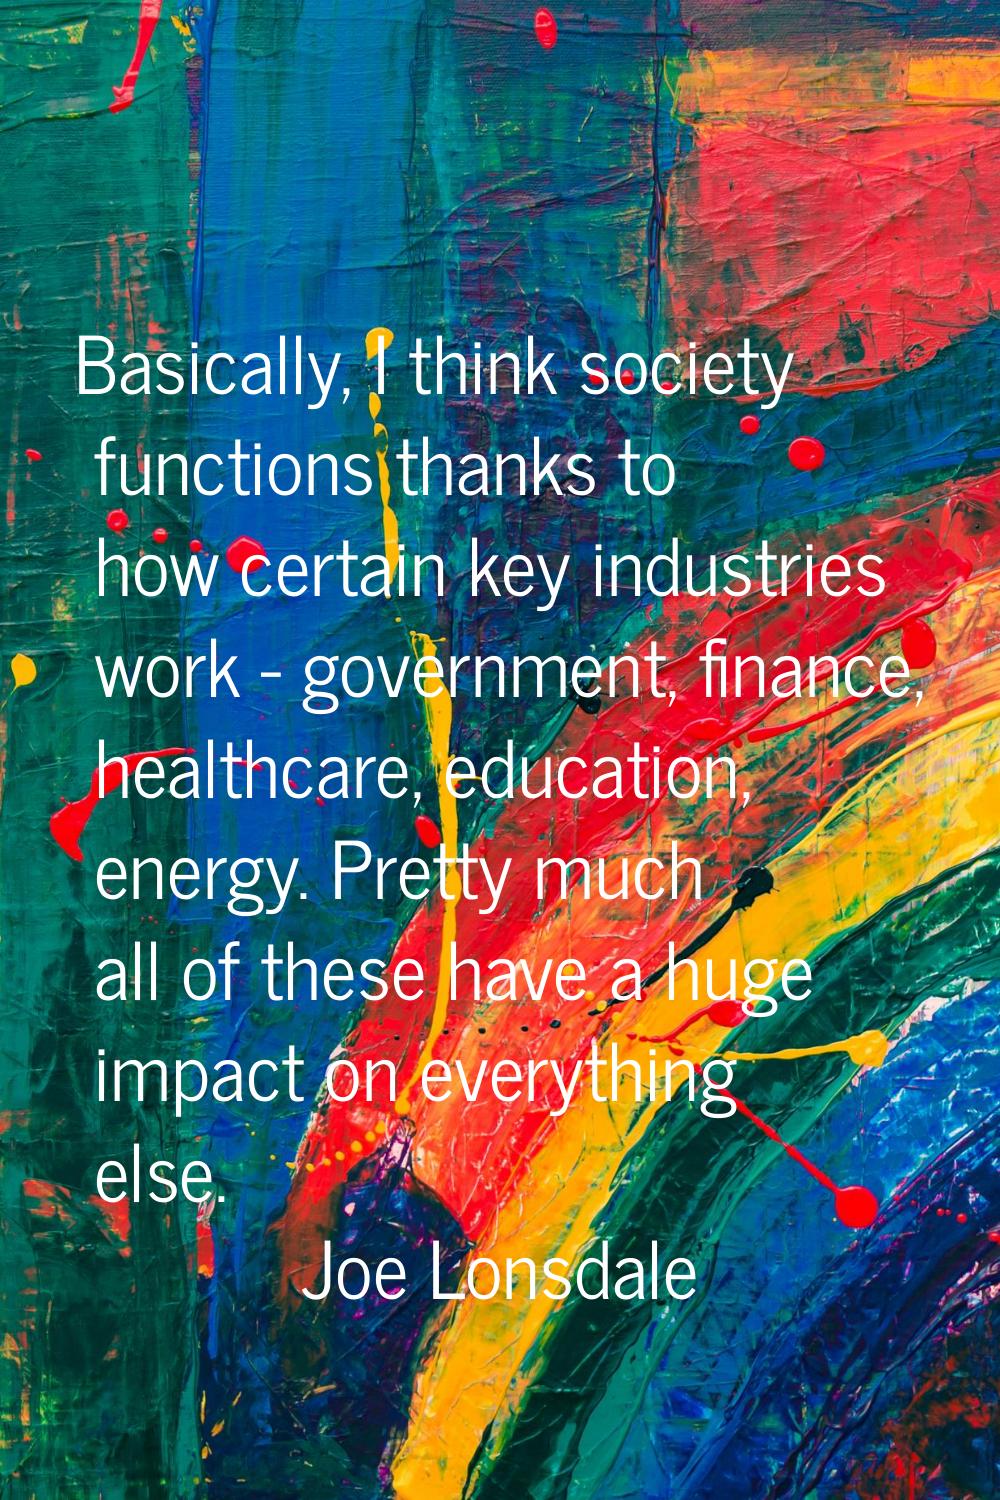 Basically, I think society functions thanks to how certain key industries work - government, financ